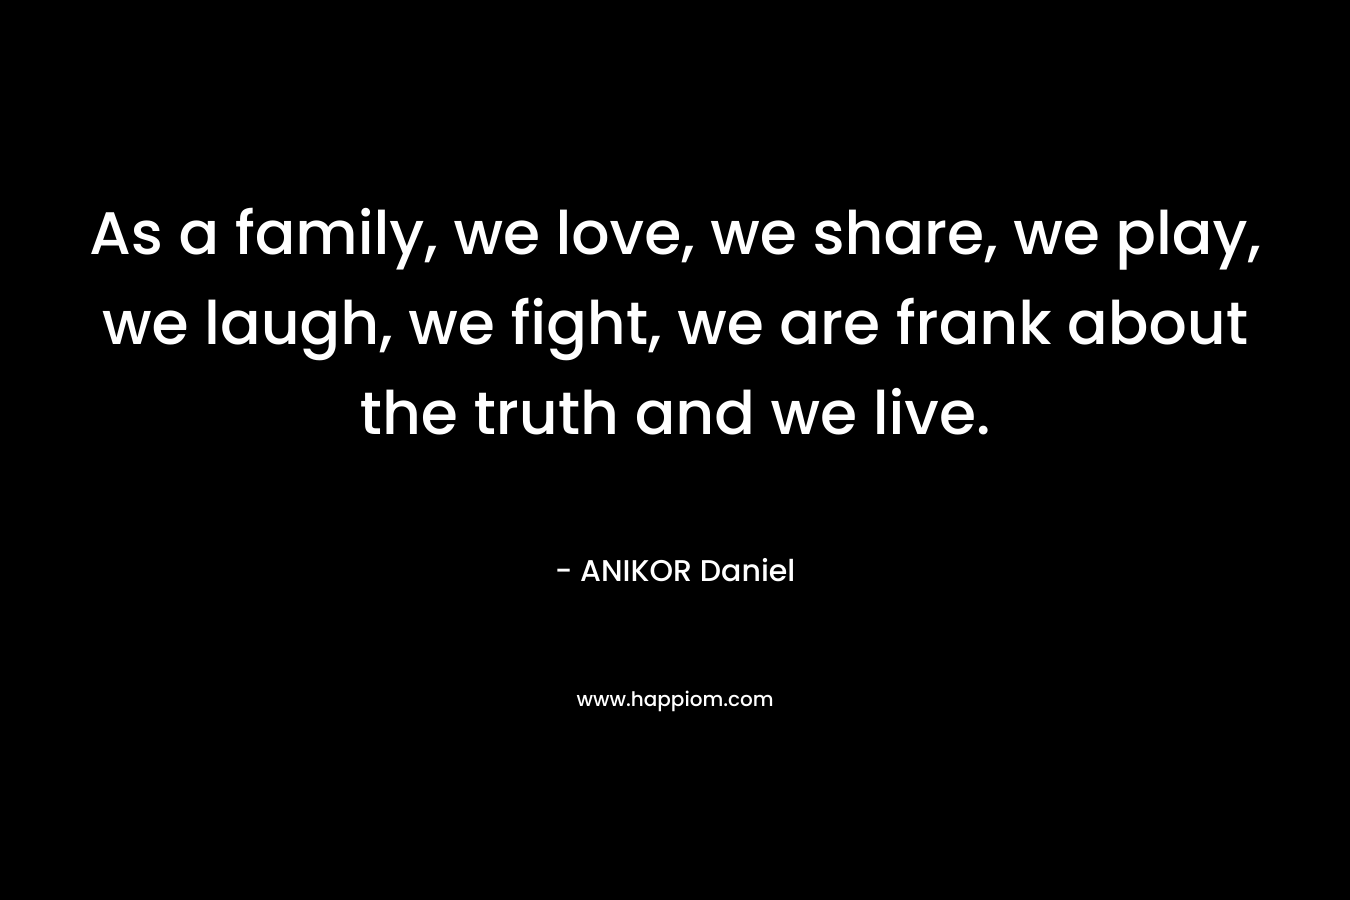 As a family, we love, we share, we play, we laugh, we fight, we are frank about the truth and we live.